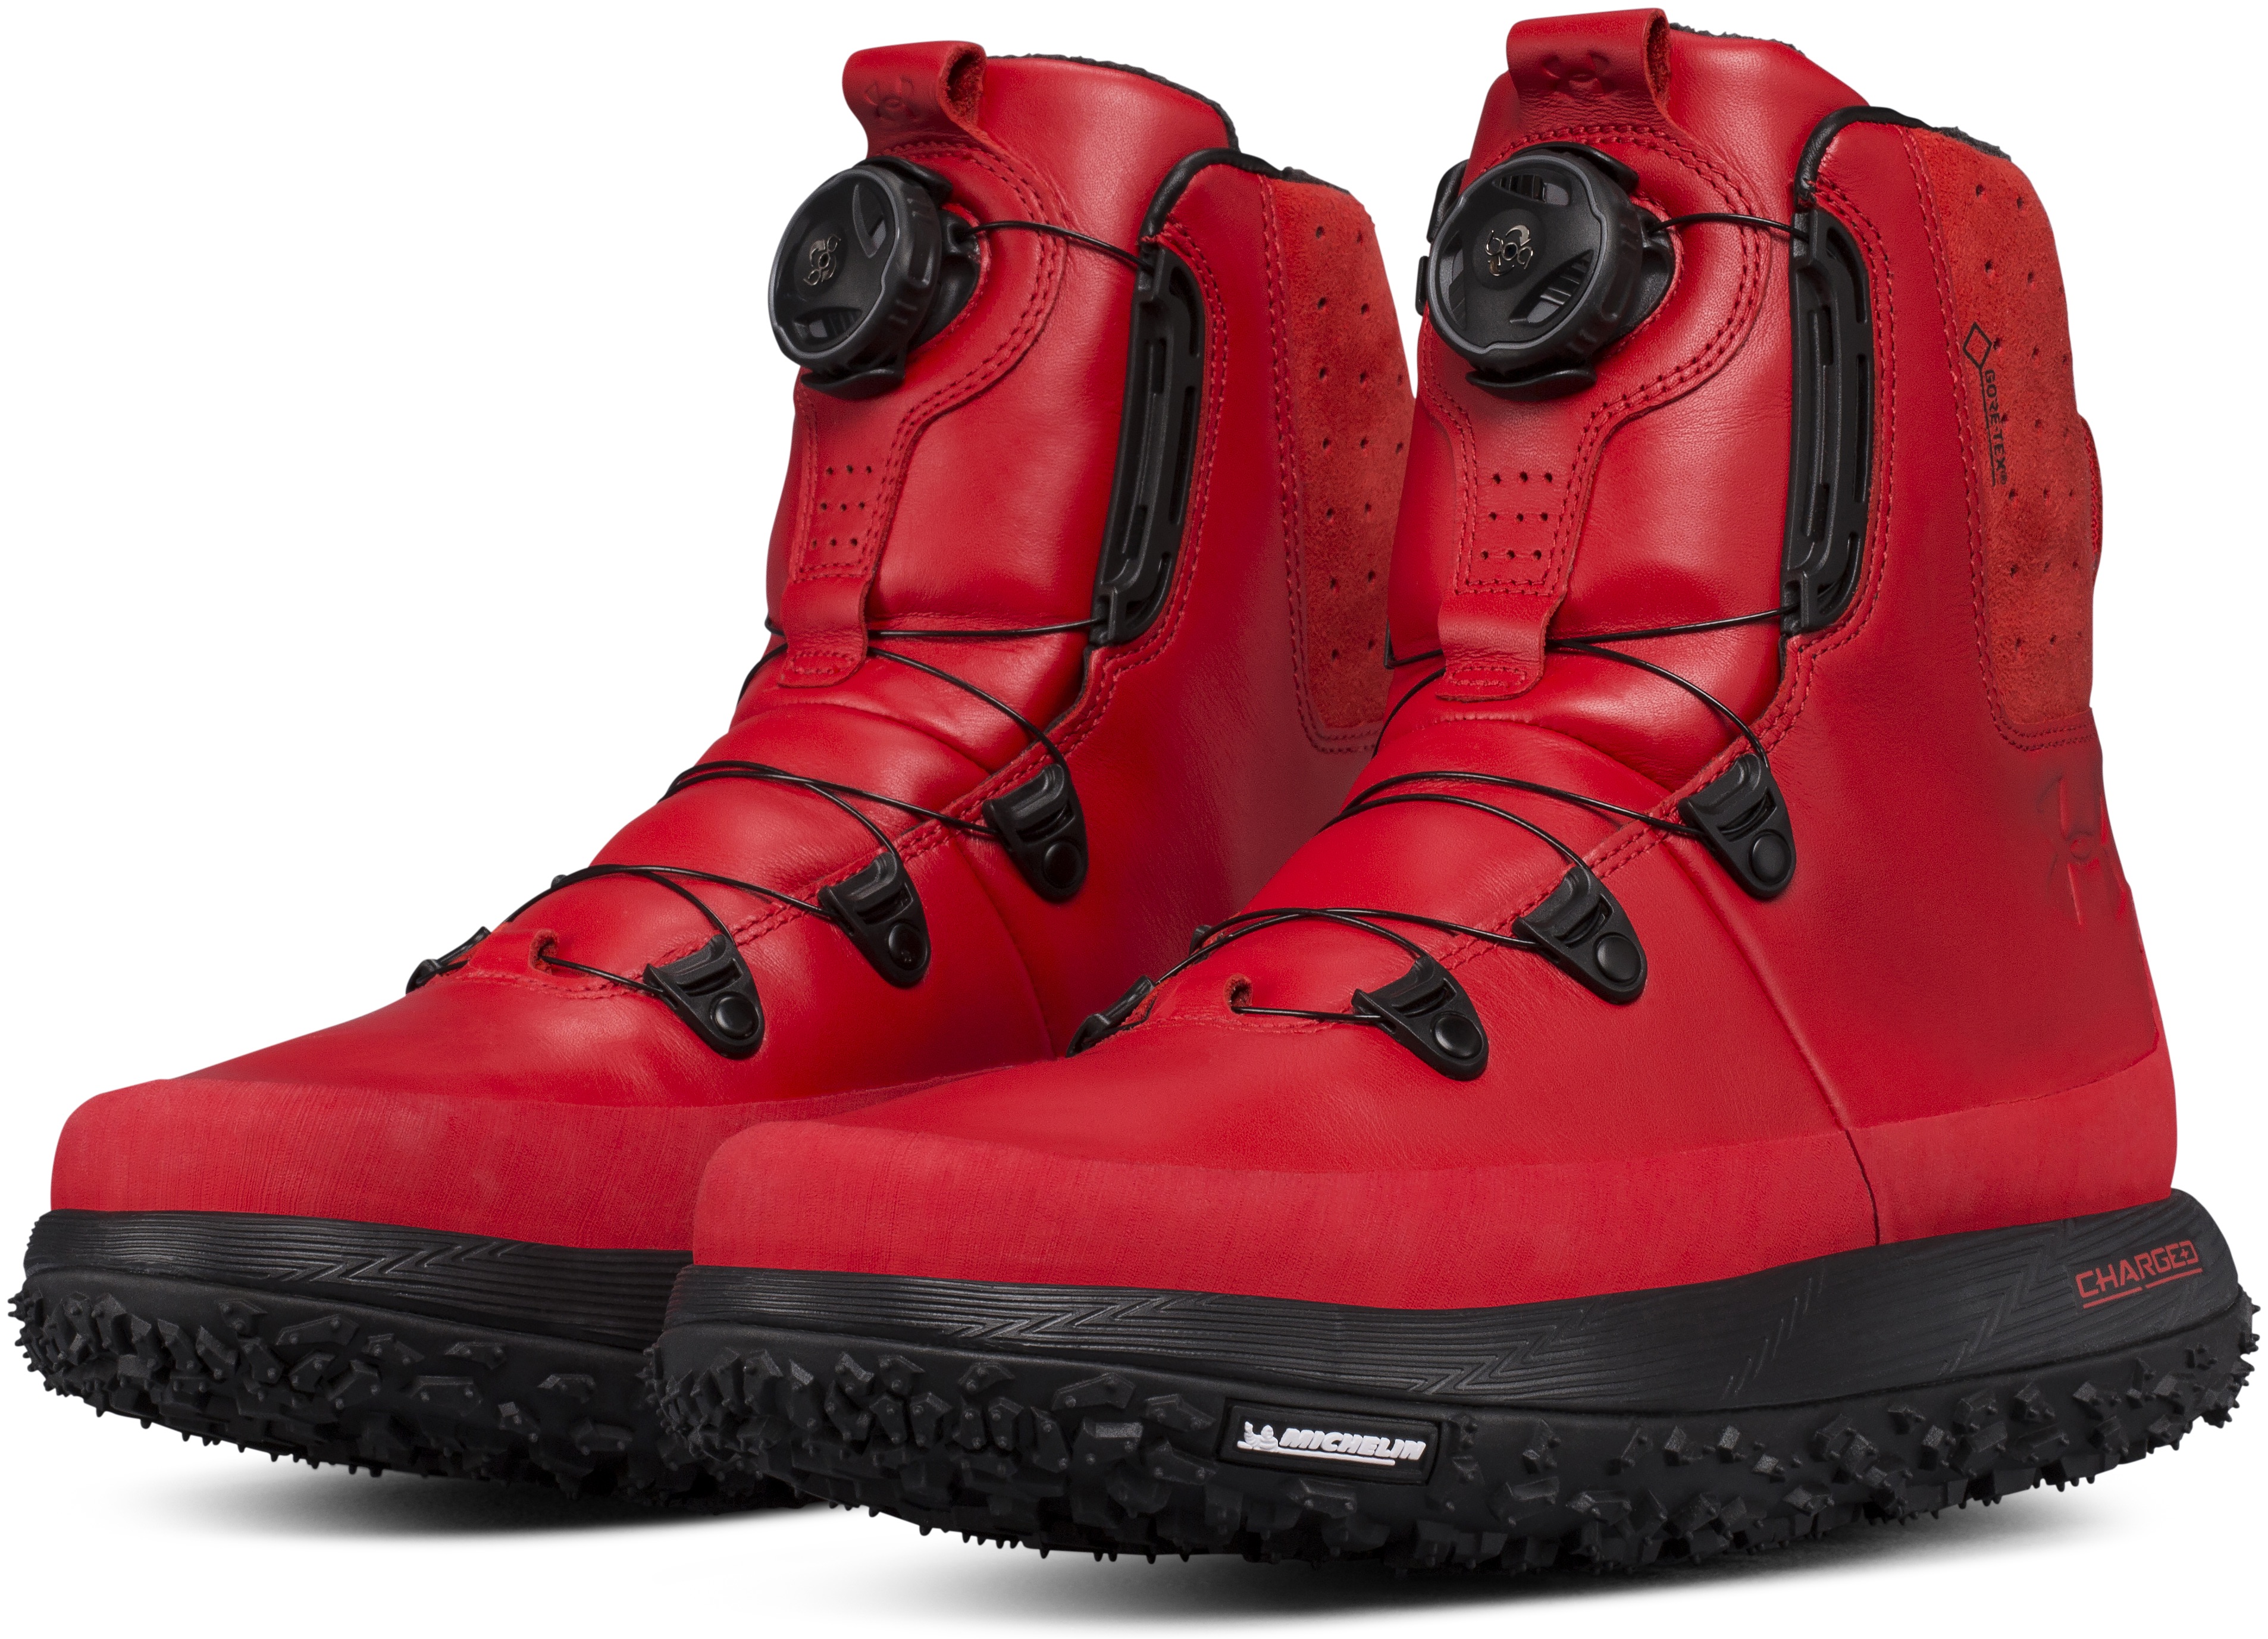 under armour boots canada